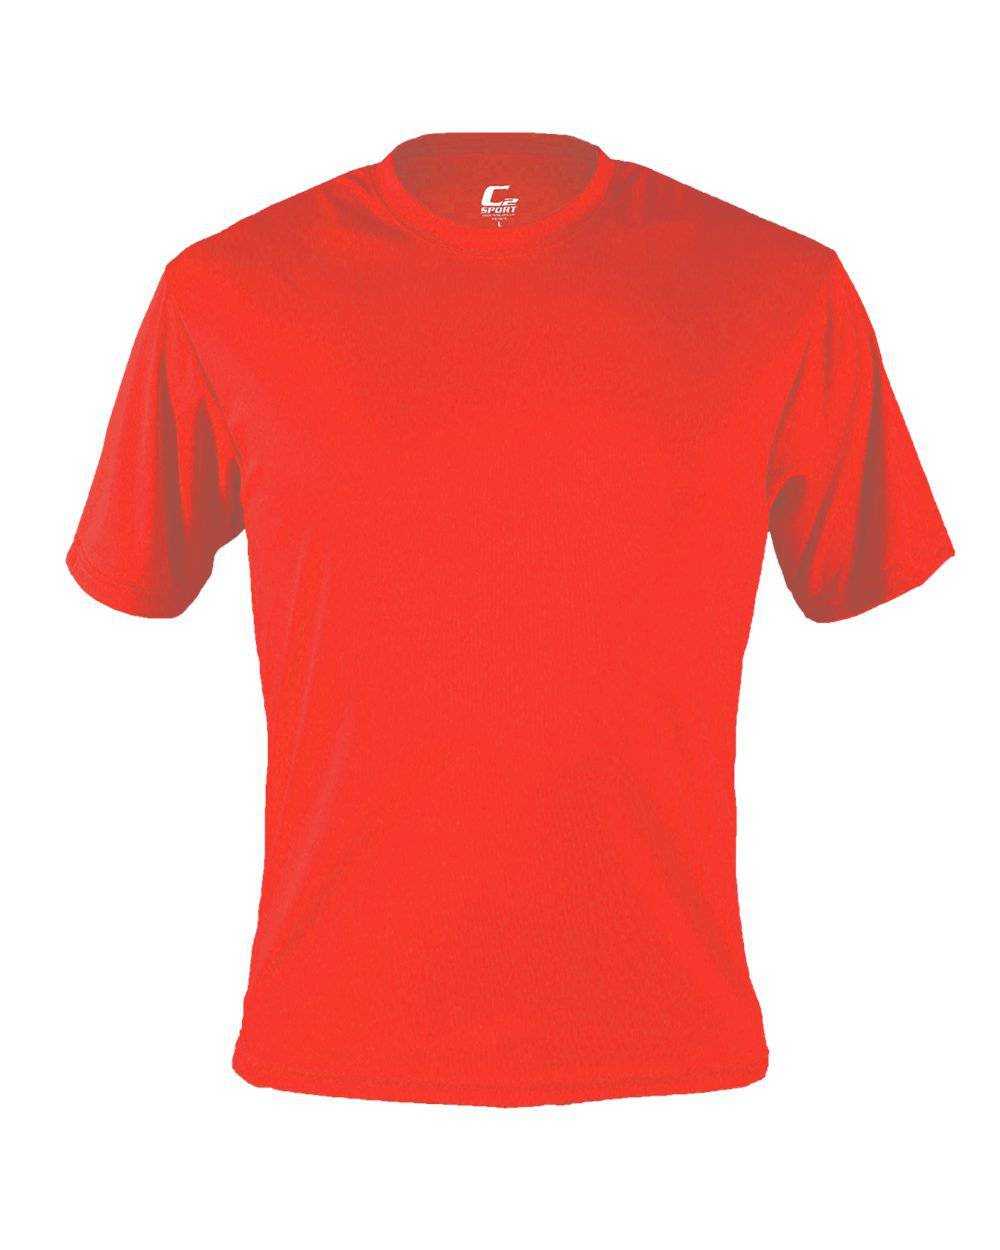 C2 Sport 5100 Performance Tee - Hot Coral - HIT a Double - 1